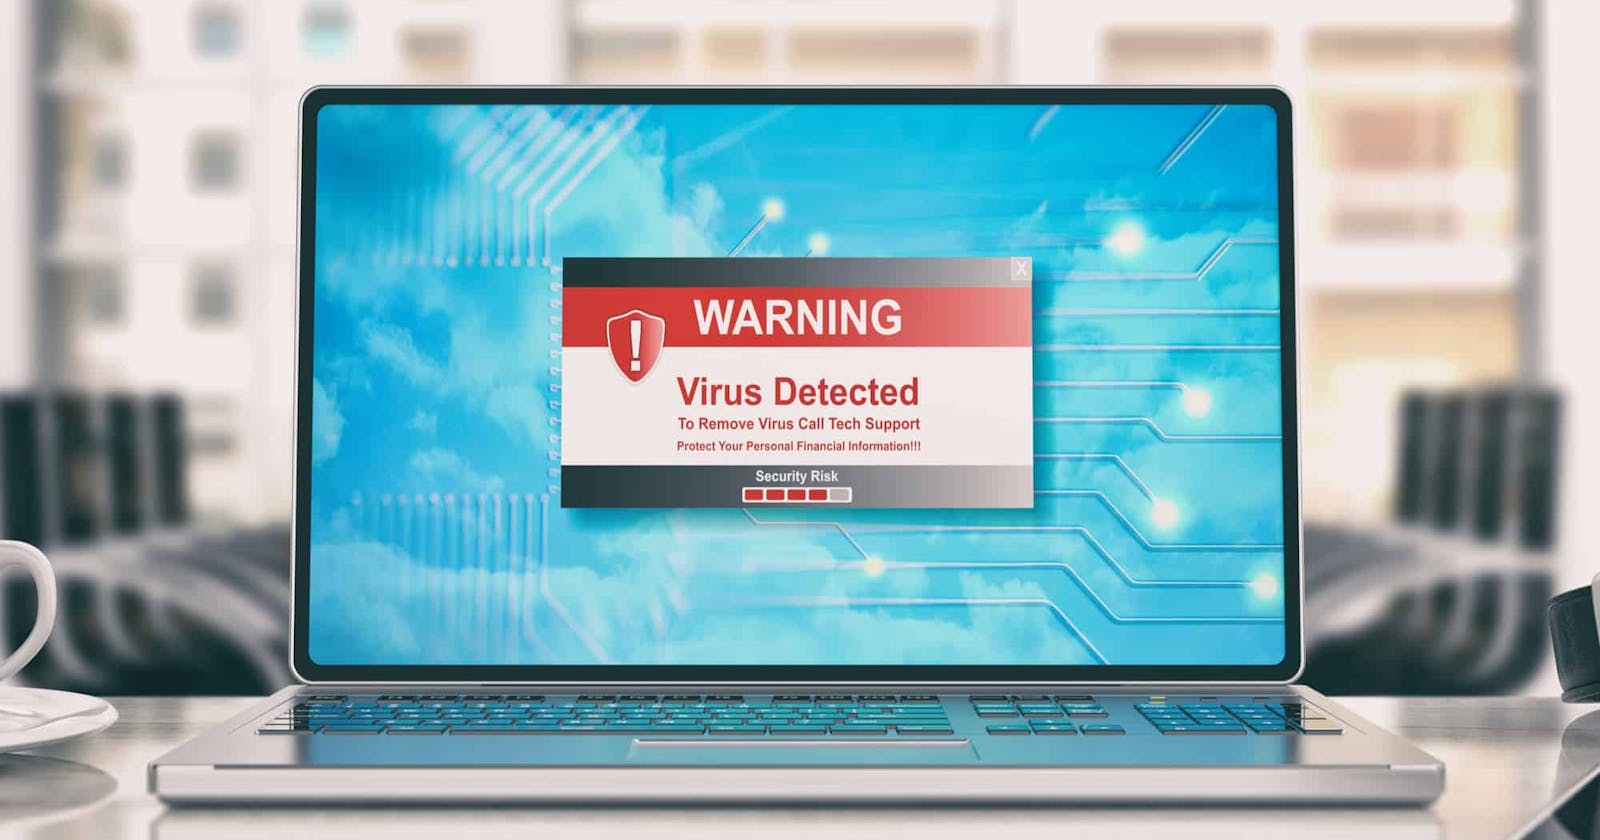 How To Prevent Getting Computer Viruses